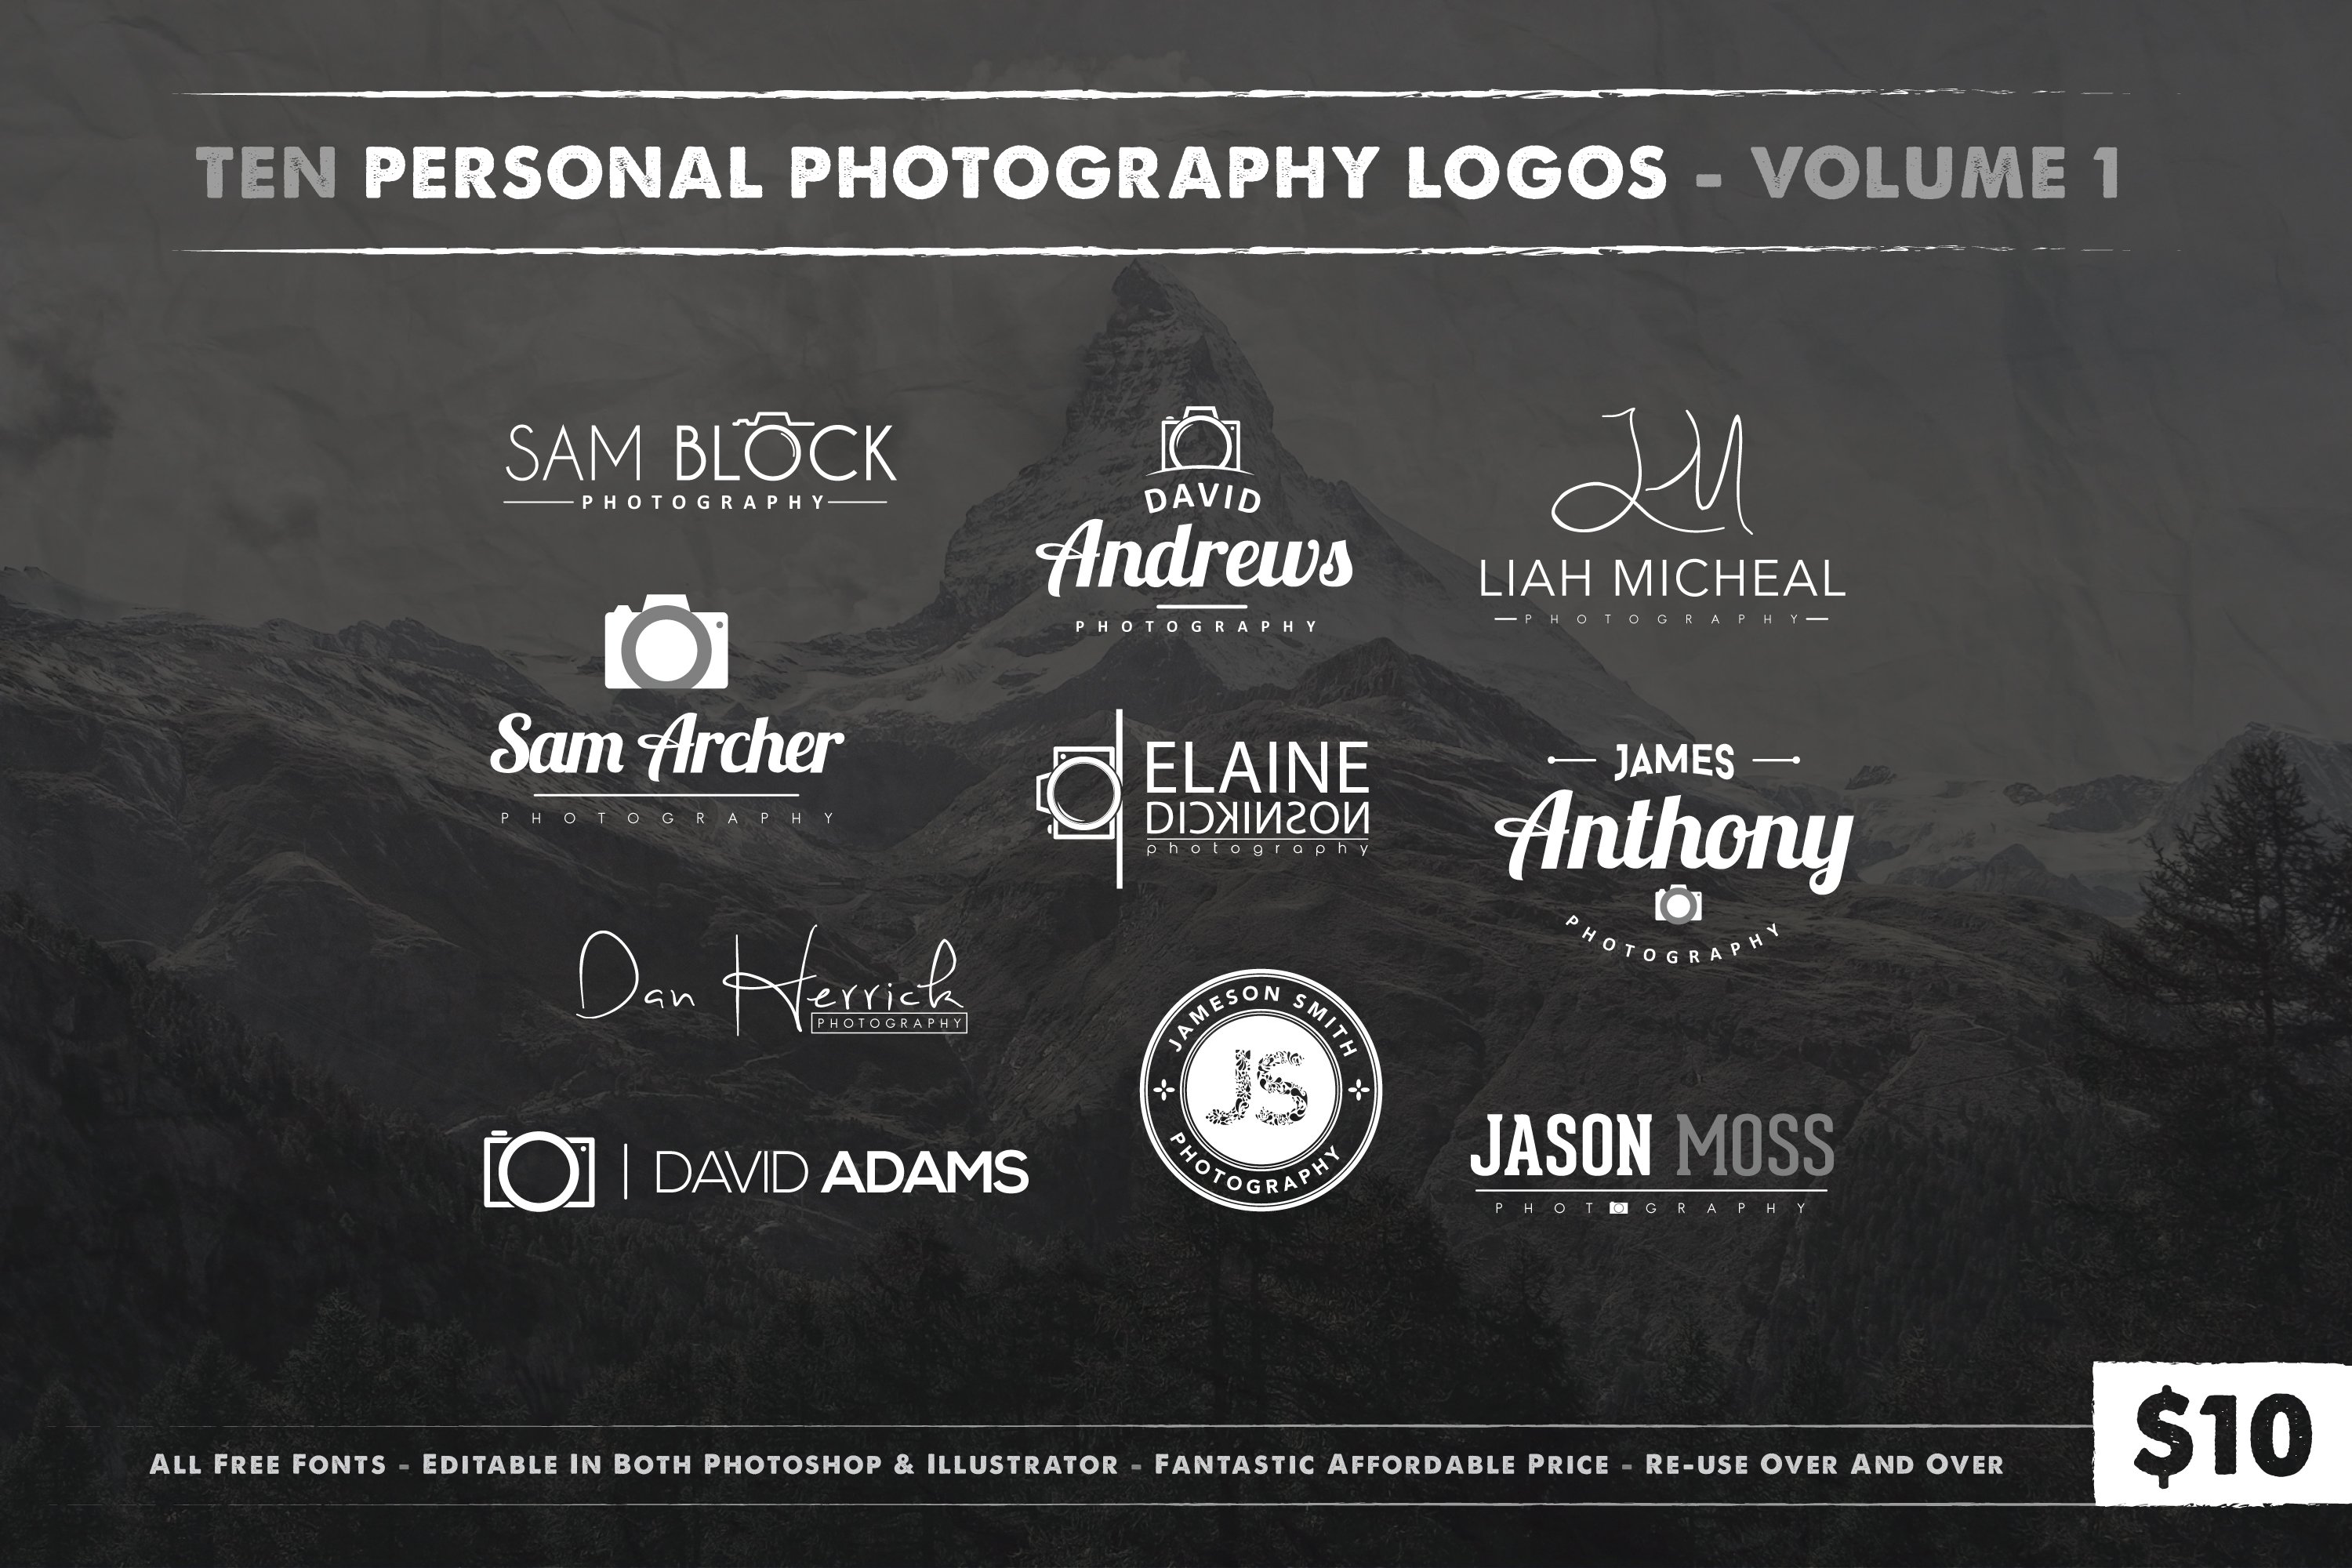 Personal photography logos.